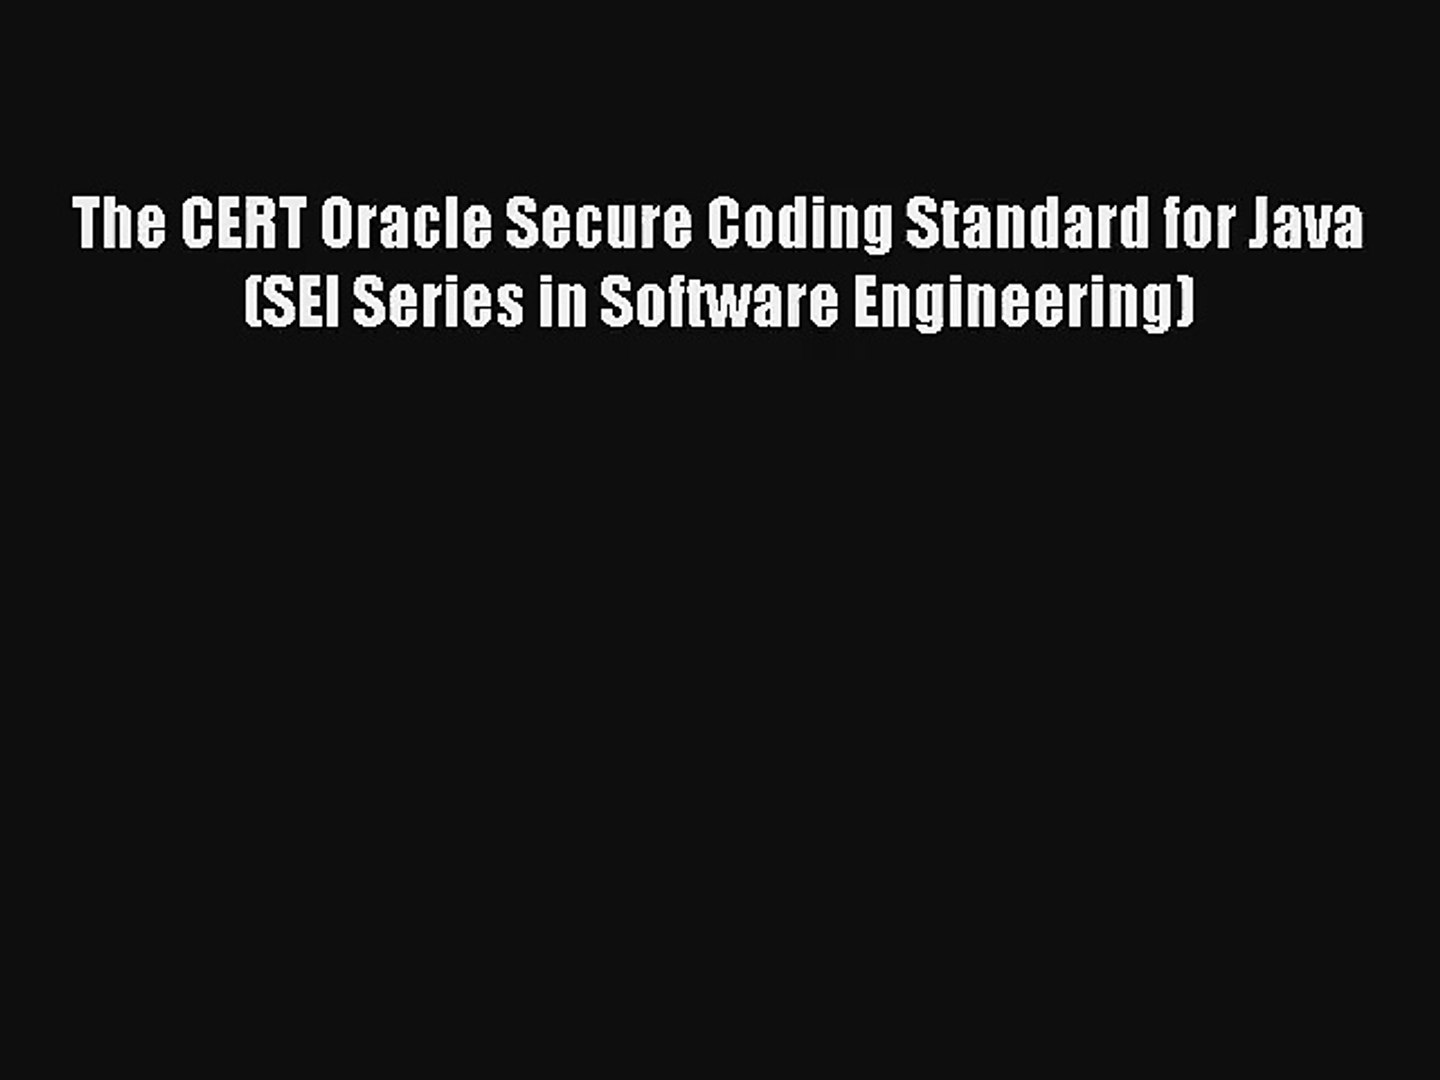 Read The CERT Oracle Secure Coding Standard for Java (SEI Series in Software Engineering)#